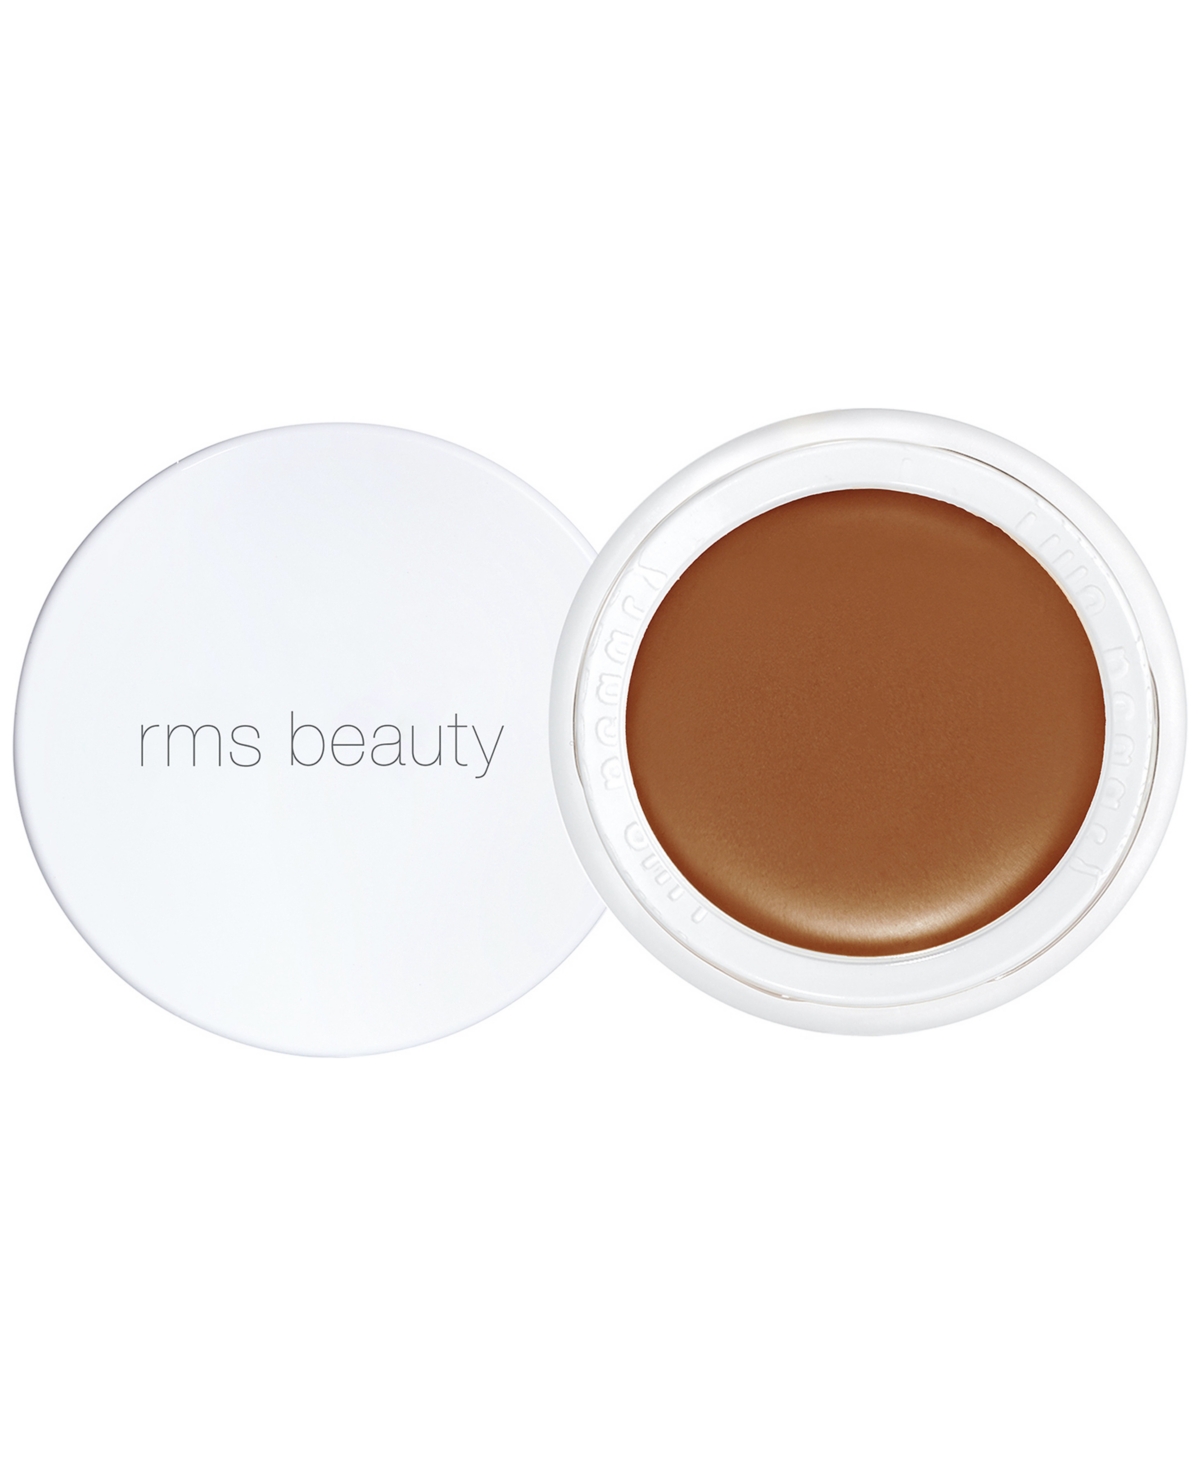 Rms Beauty Uncoverup Concealer In Rich Light Mahogany